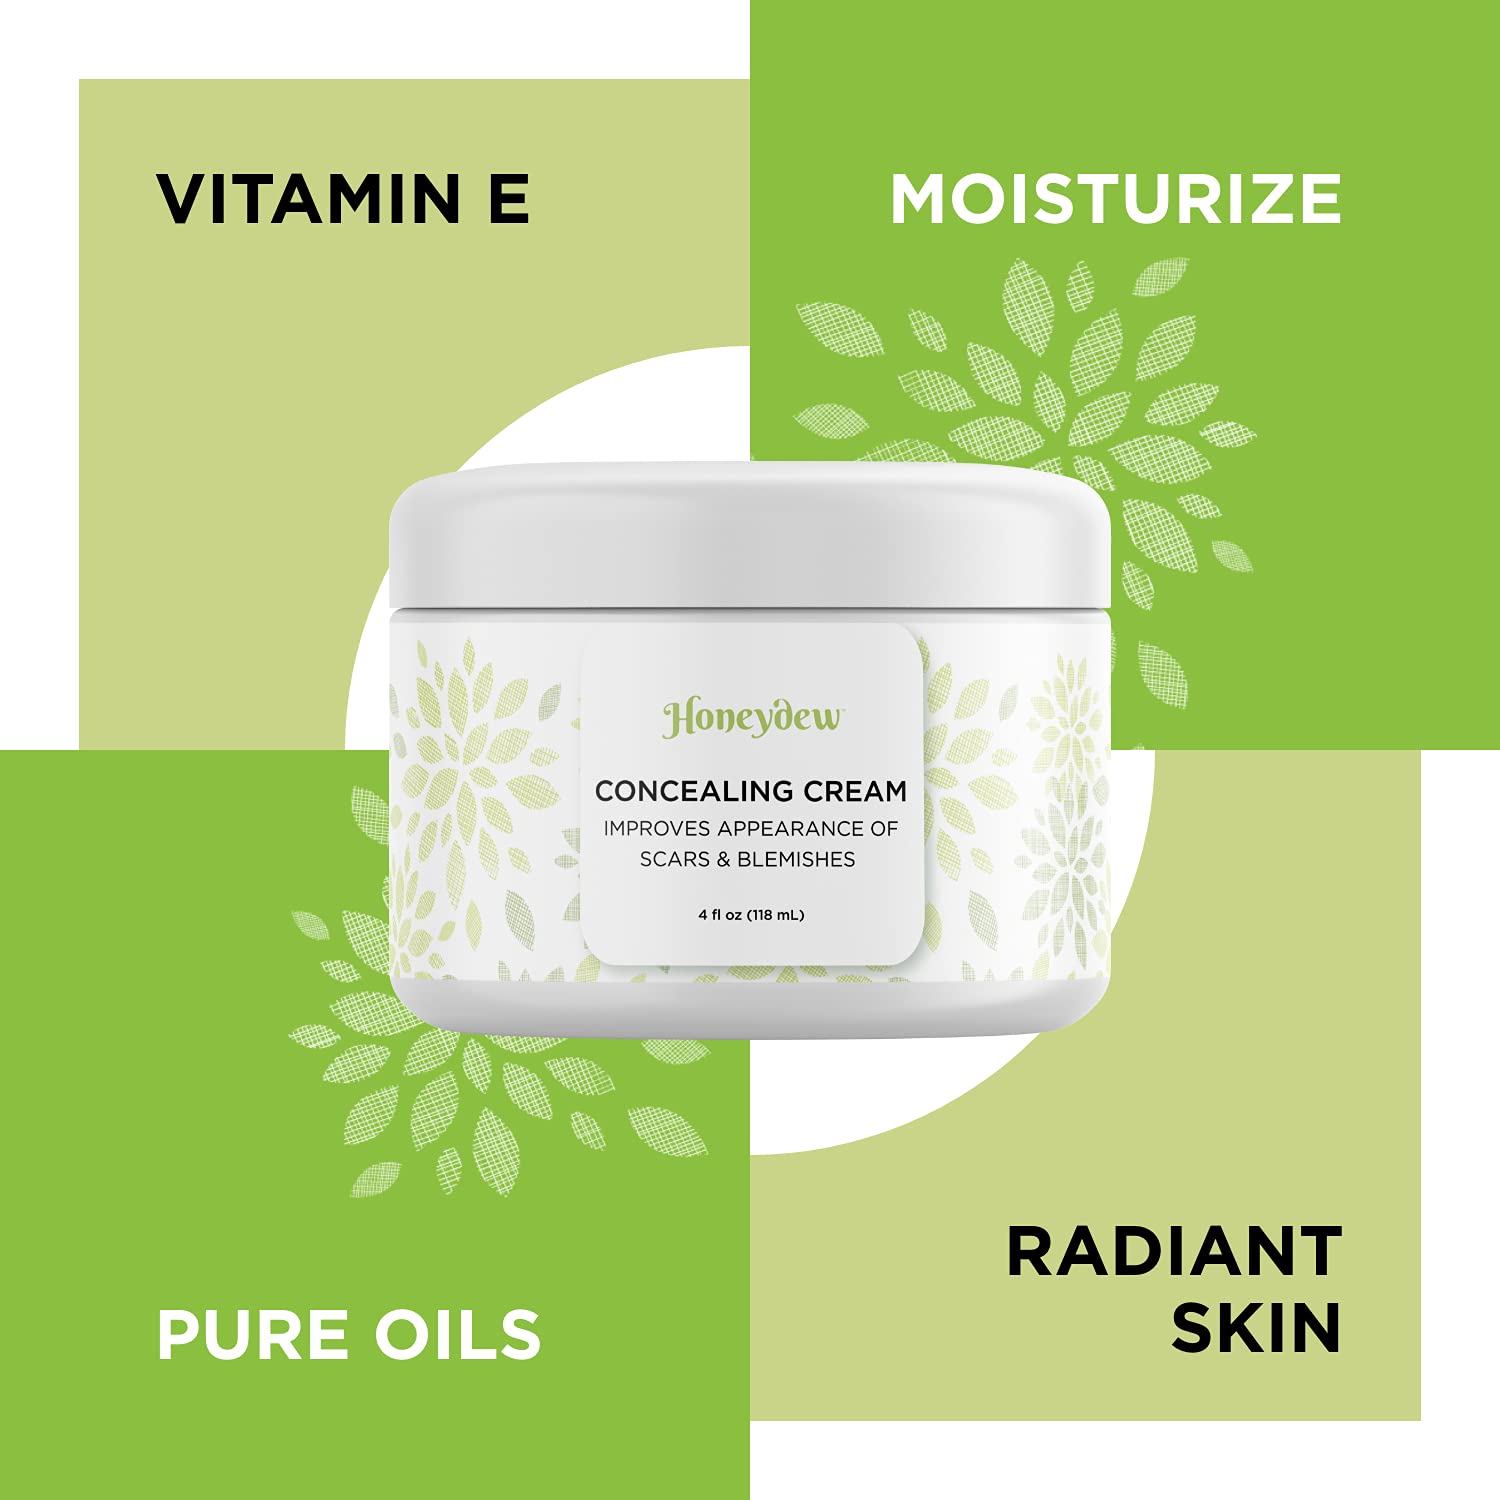 Scar Cream for Face and Body Care - Hydrating Scar Fade Cream and Stubborn Blemish Treatment for Face Care with Nourishing Shea Butter Emollient Cream - Clear Skin Moisturizer for Sensitive Skin Care